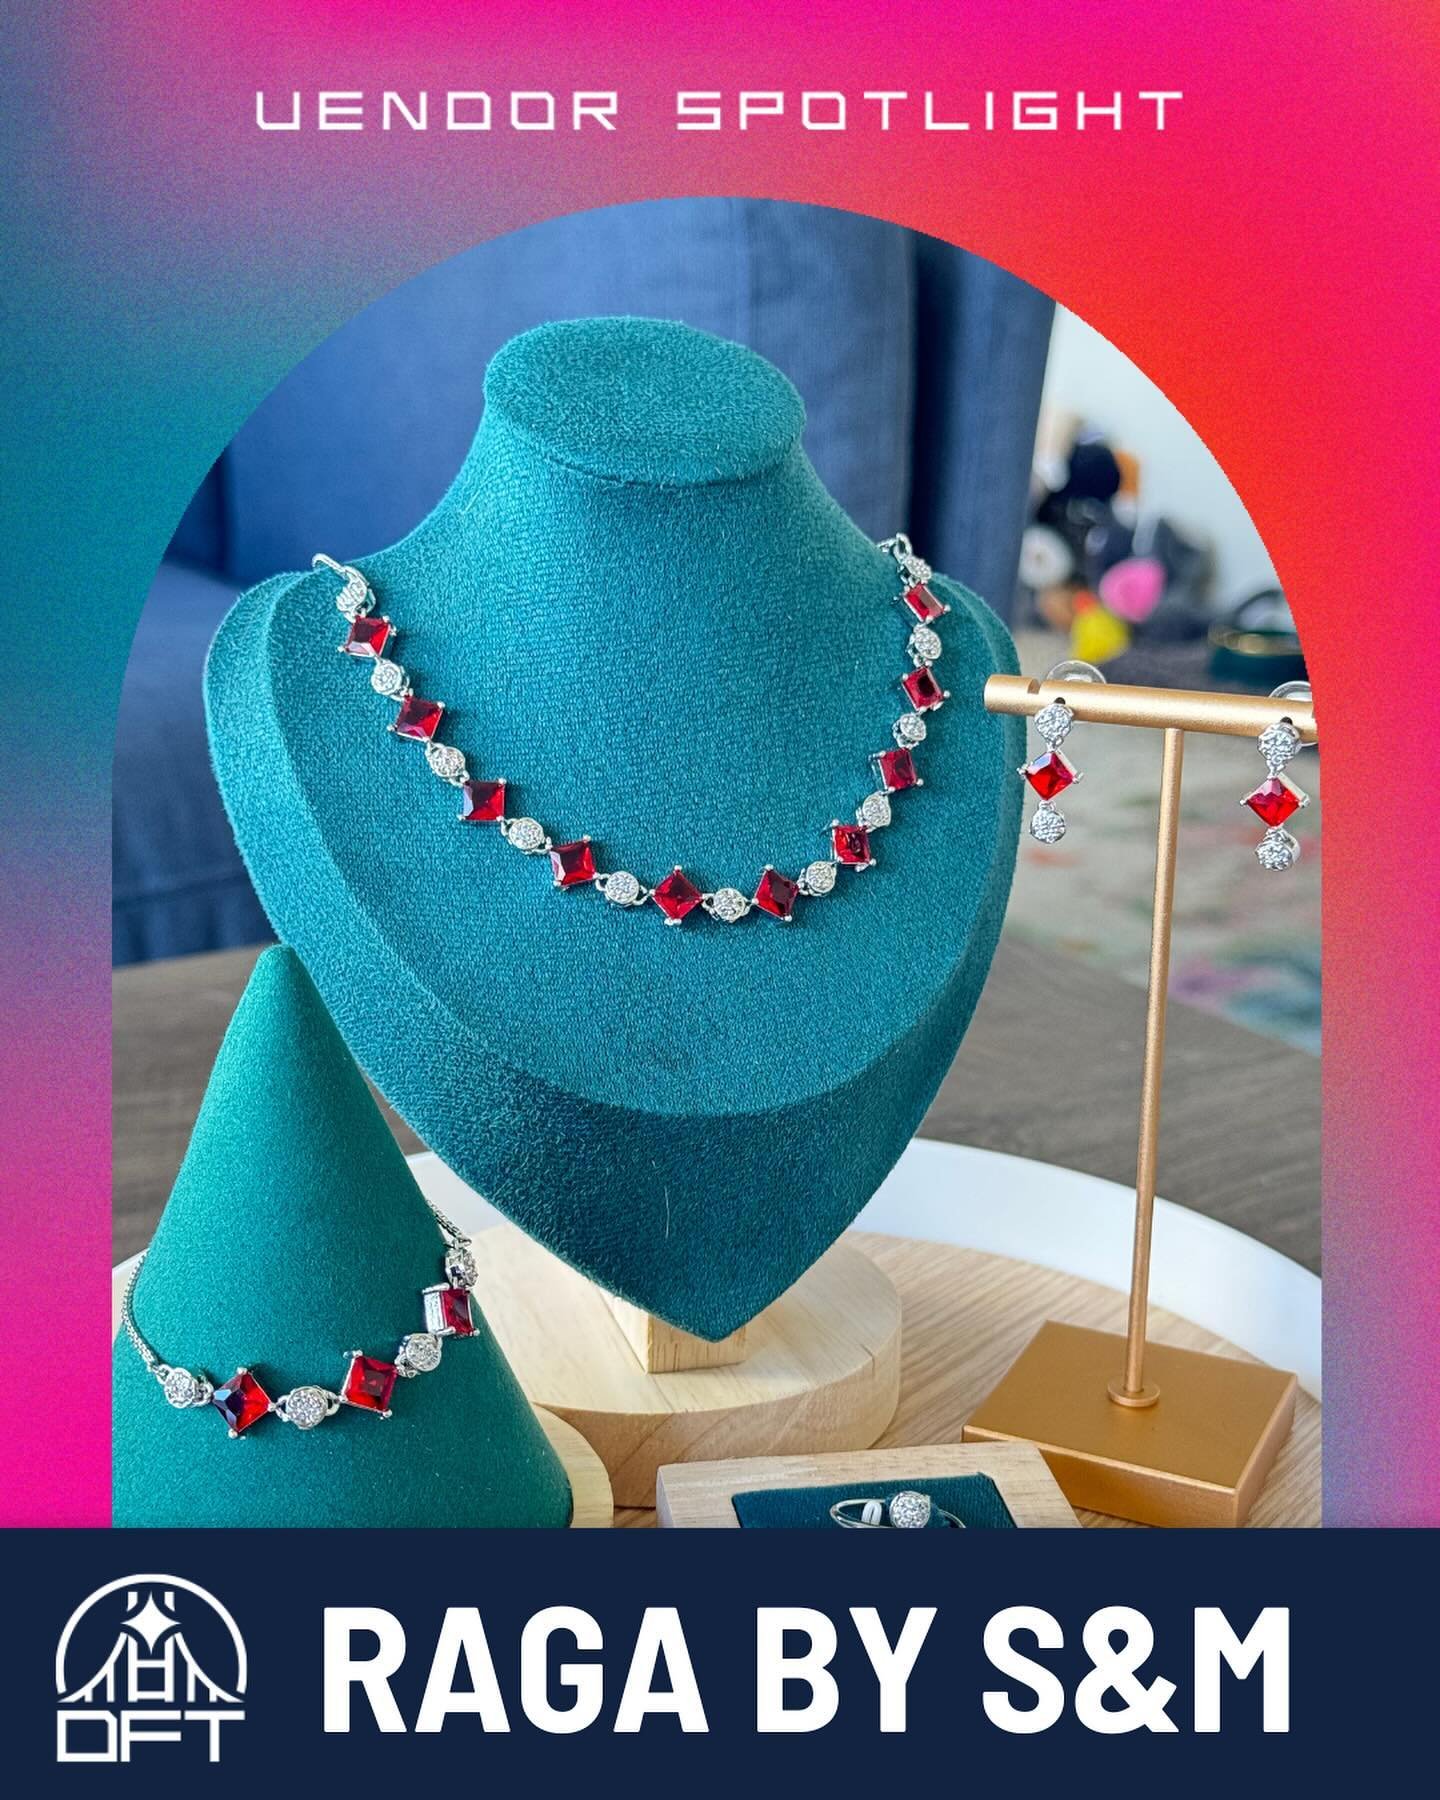 🎁 INTRODUCING OUR RETAIL VENDORS!

🌁 Shop til&rsquo; you drop and support local businesses this Thursday at our first ever DFT STREET PARTY!

Featuring:
@ByrdBeaks 
@Colors4Love
@ellison.SF
@EverythingYouSeeJewelry
@jamals_jewels
@NYXA.co
@RagaGems